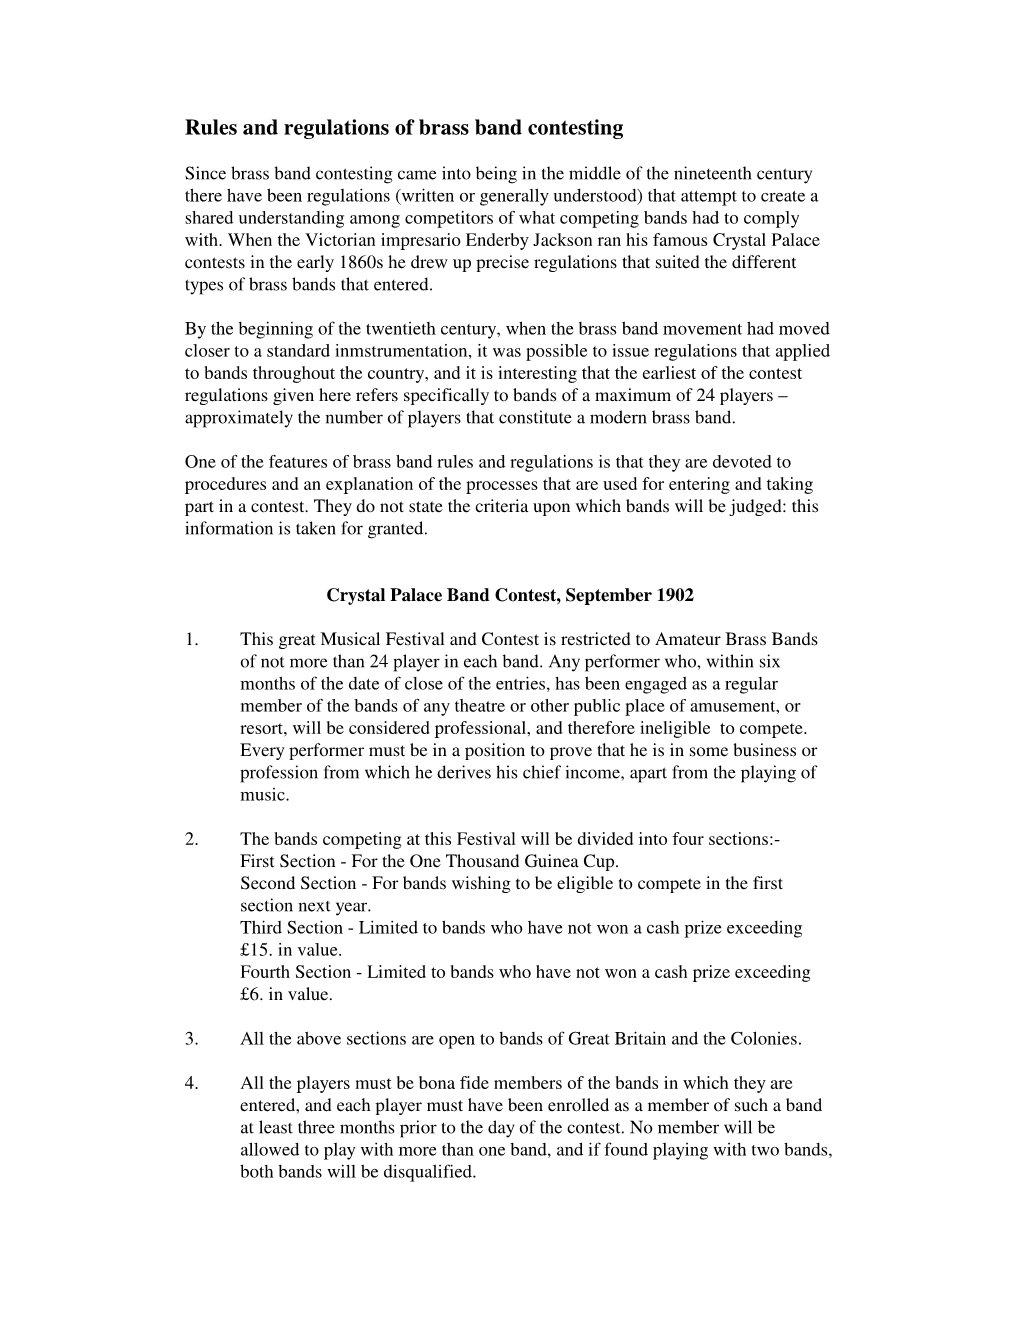 Rules and Regulations of Brass Band Contesting